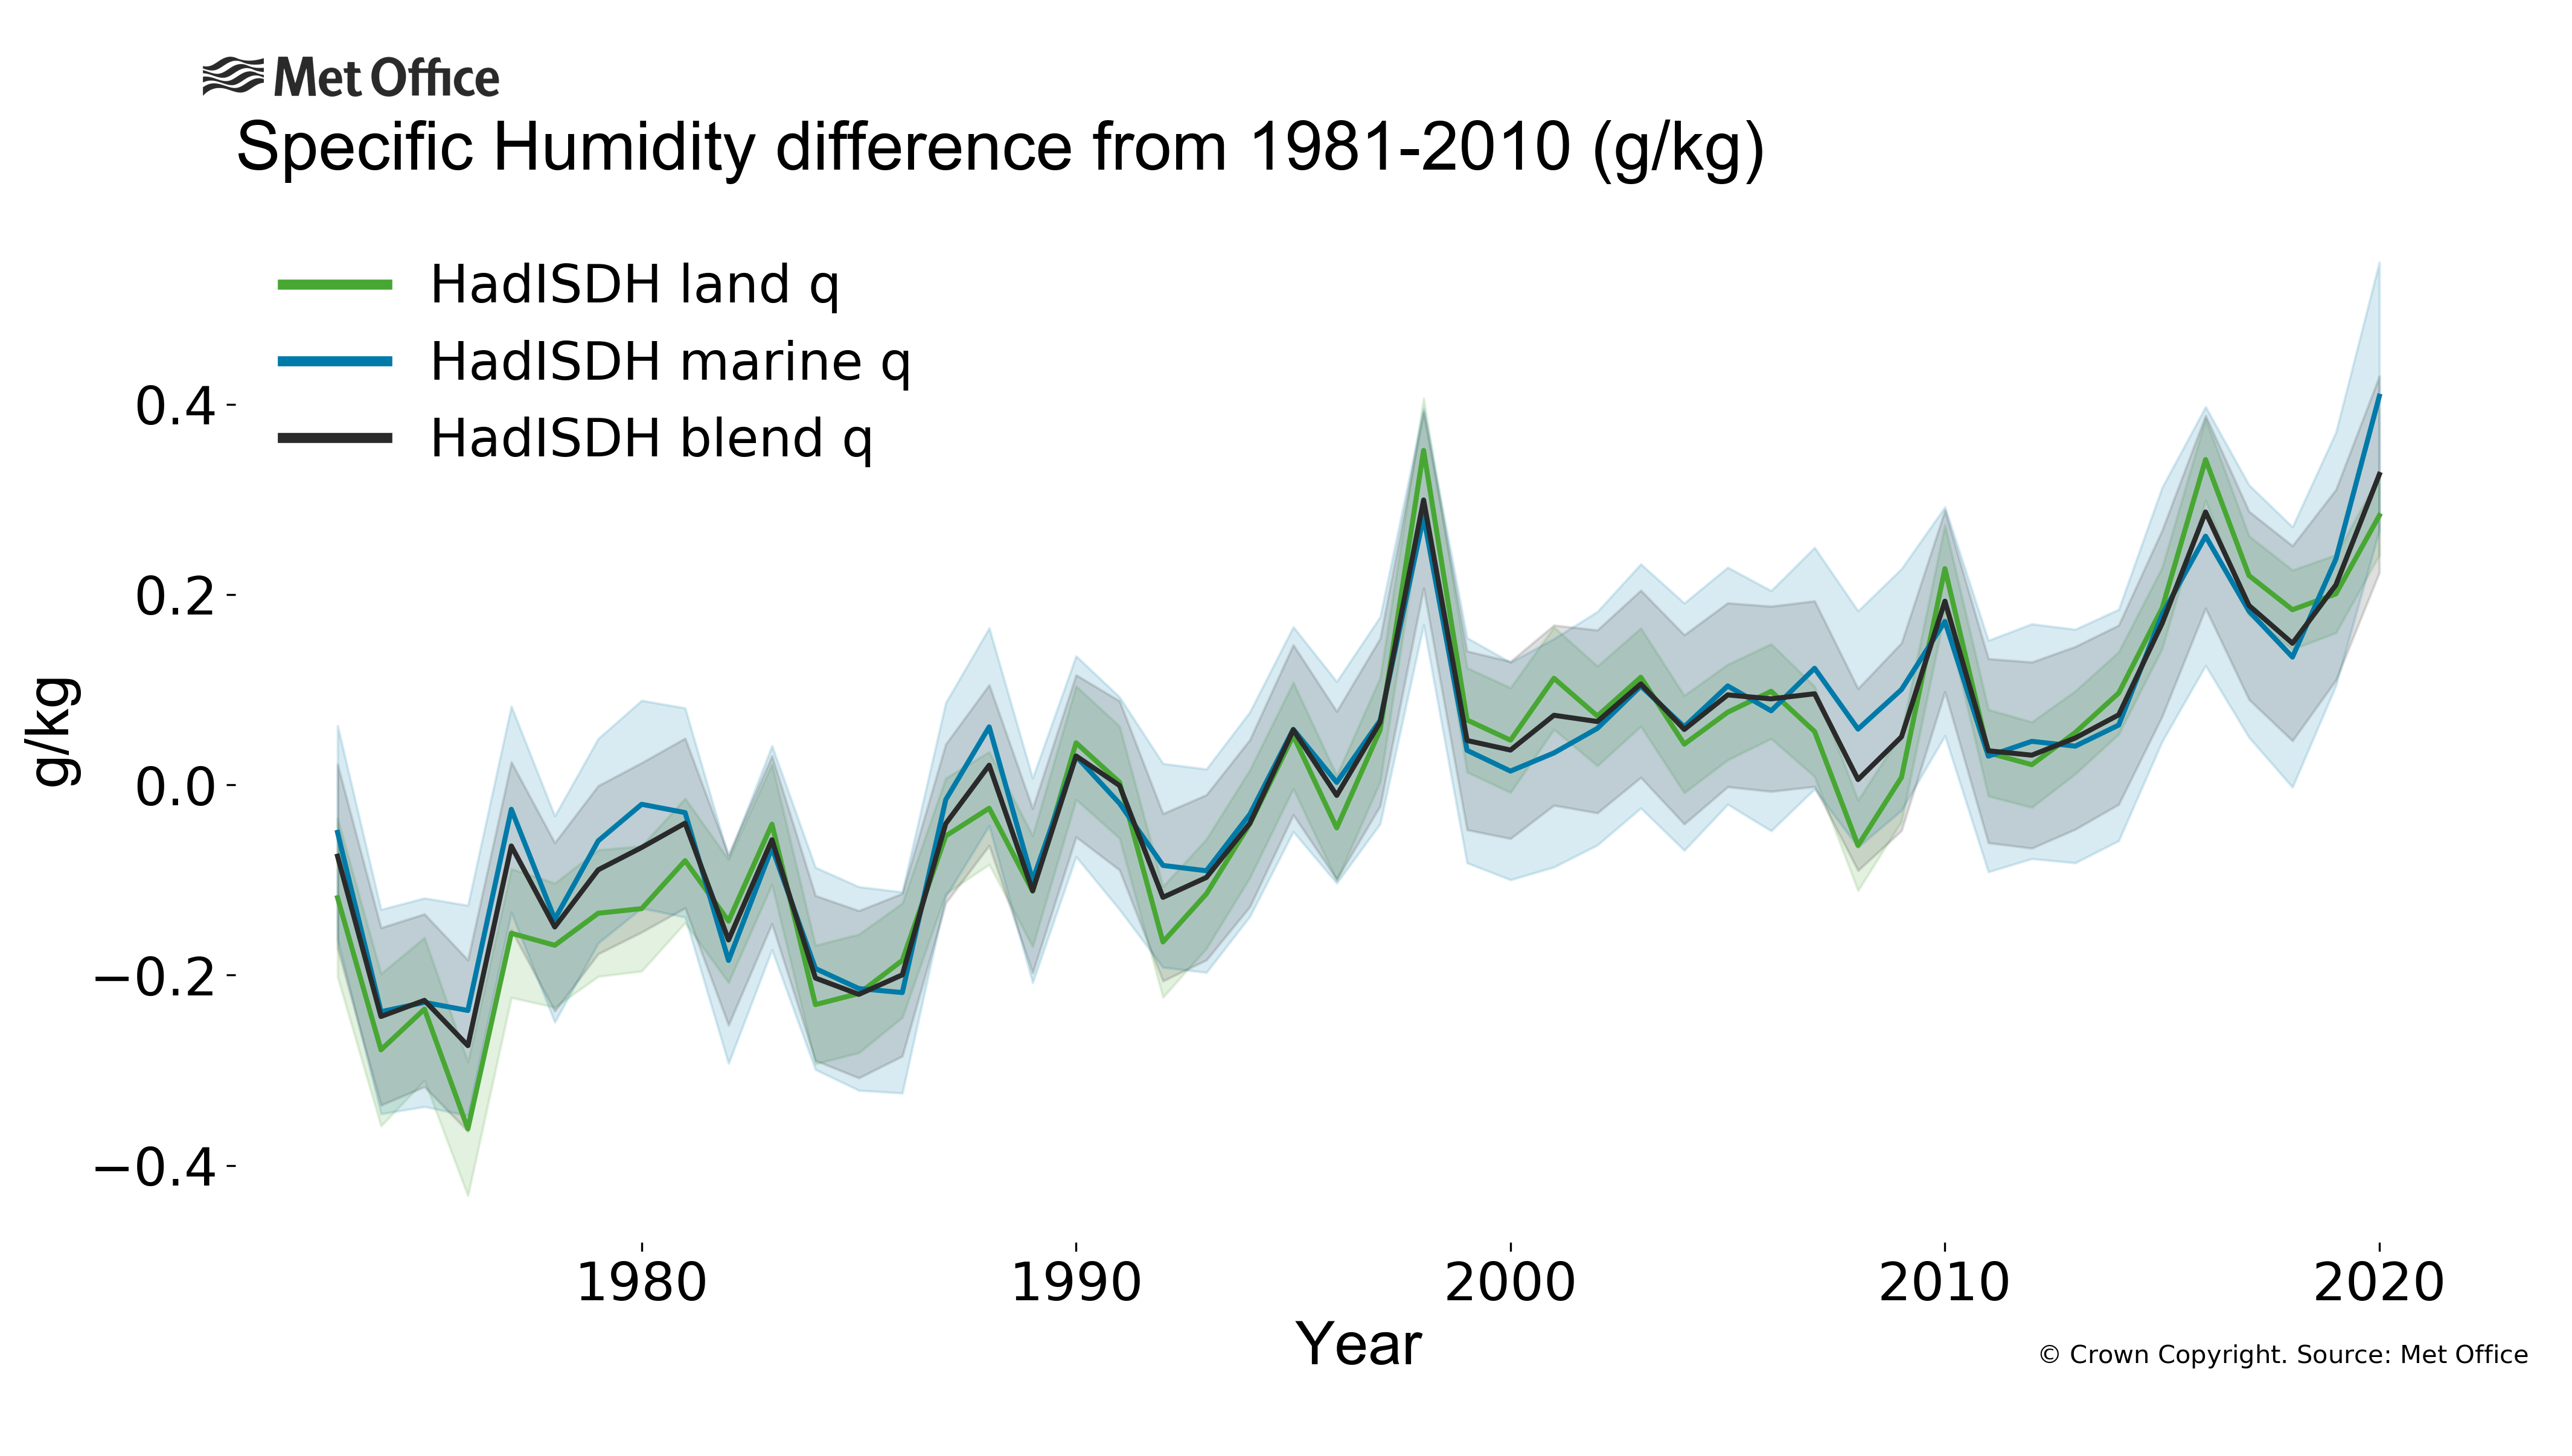 
Annual mean specific humidity anomalies (relative to 1981-2010) from 70°S-70°N.
